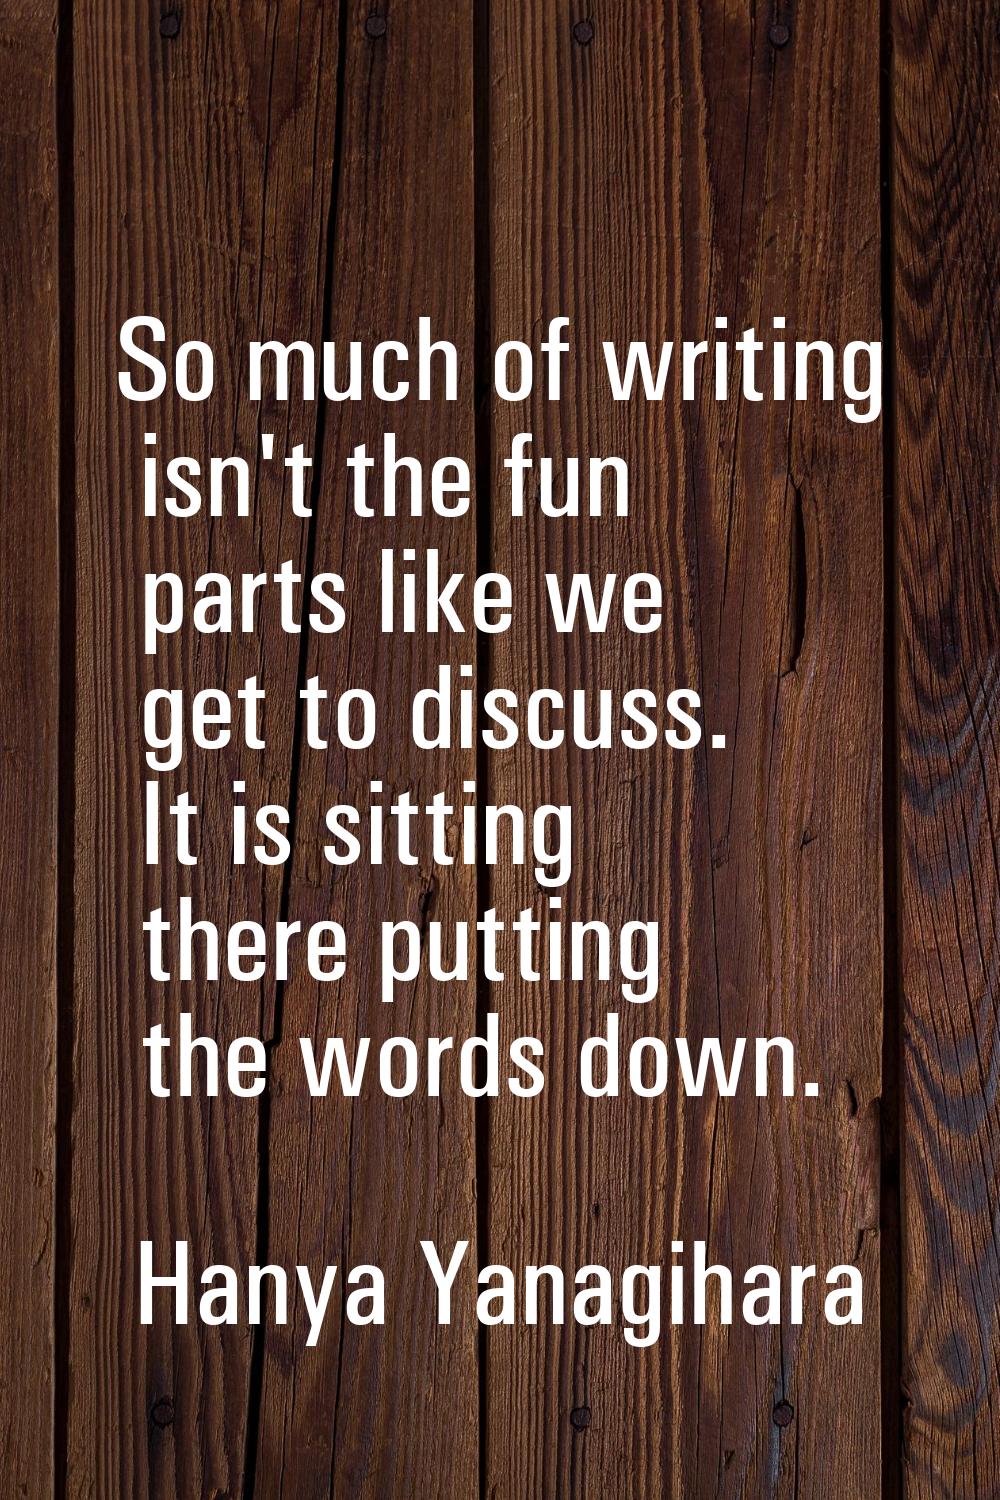 So much of writing isn't the fun parts like we get to discuss. It is sitting there putting the word